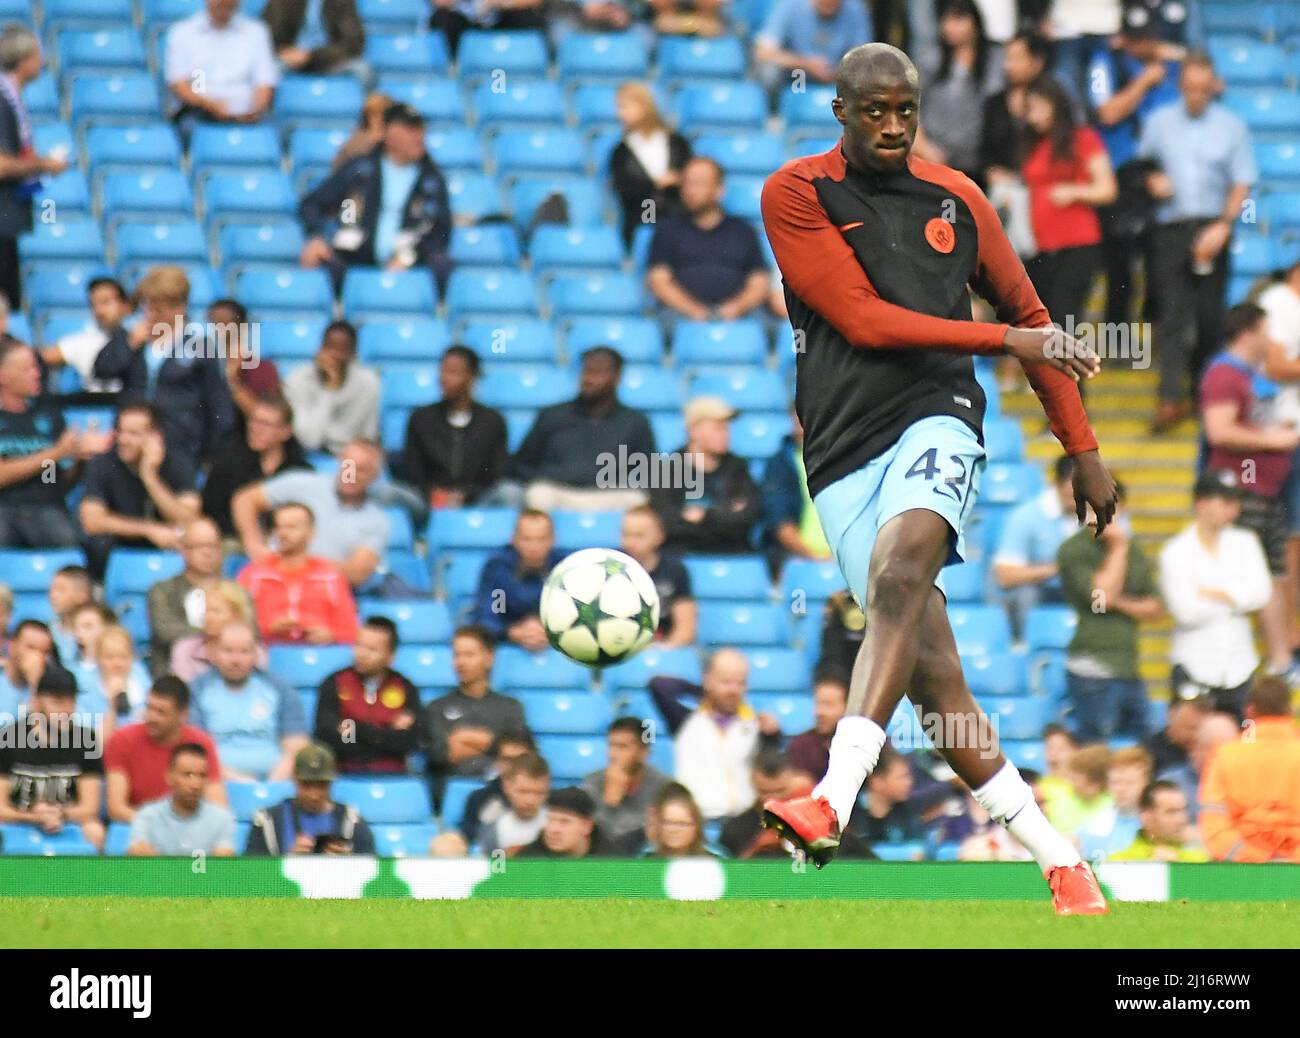 MANCHESTER, ENGLAND - AUGUST 24, 2016: Yaya Toure of City pictured prior to the second leg of the 2016/17 UEFA Champions League tie between Manchester City (Engalnd) and FCSB (Romania) at Etihad Stadium. Copyright: Cosmin Iftode/Picstaff Stock Photo